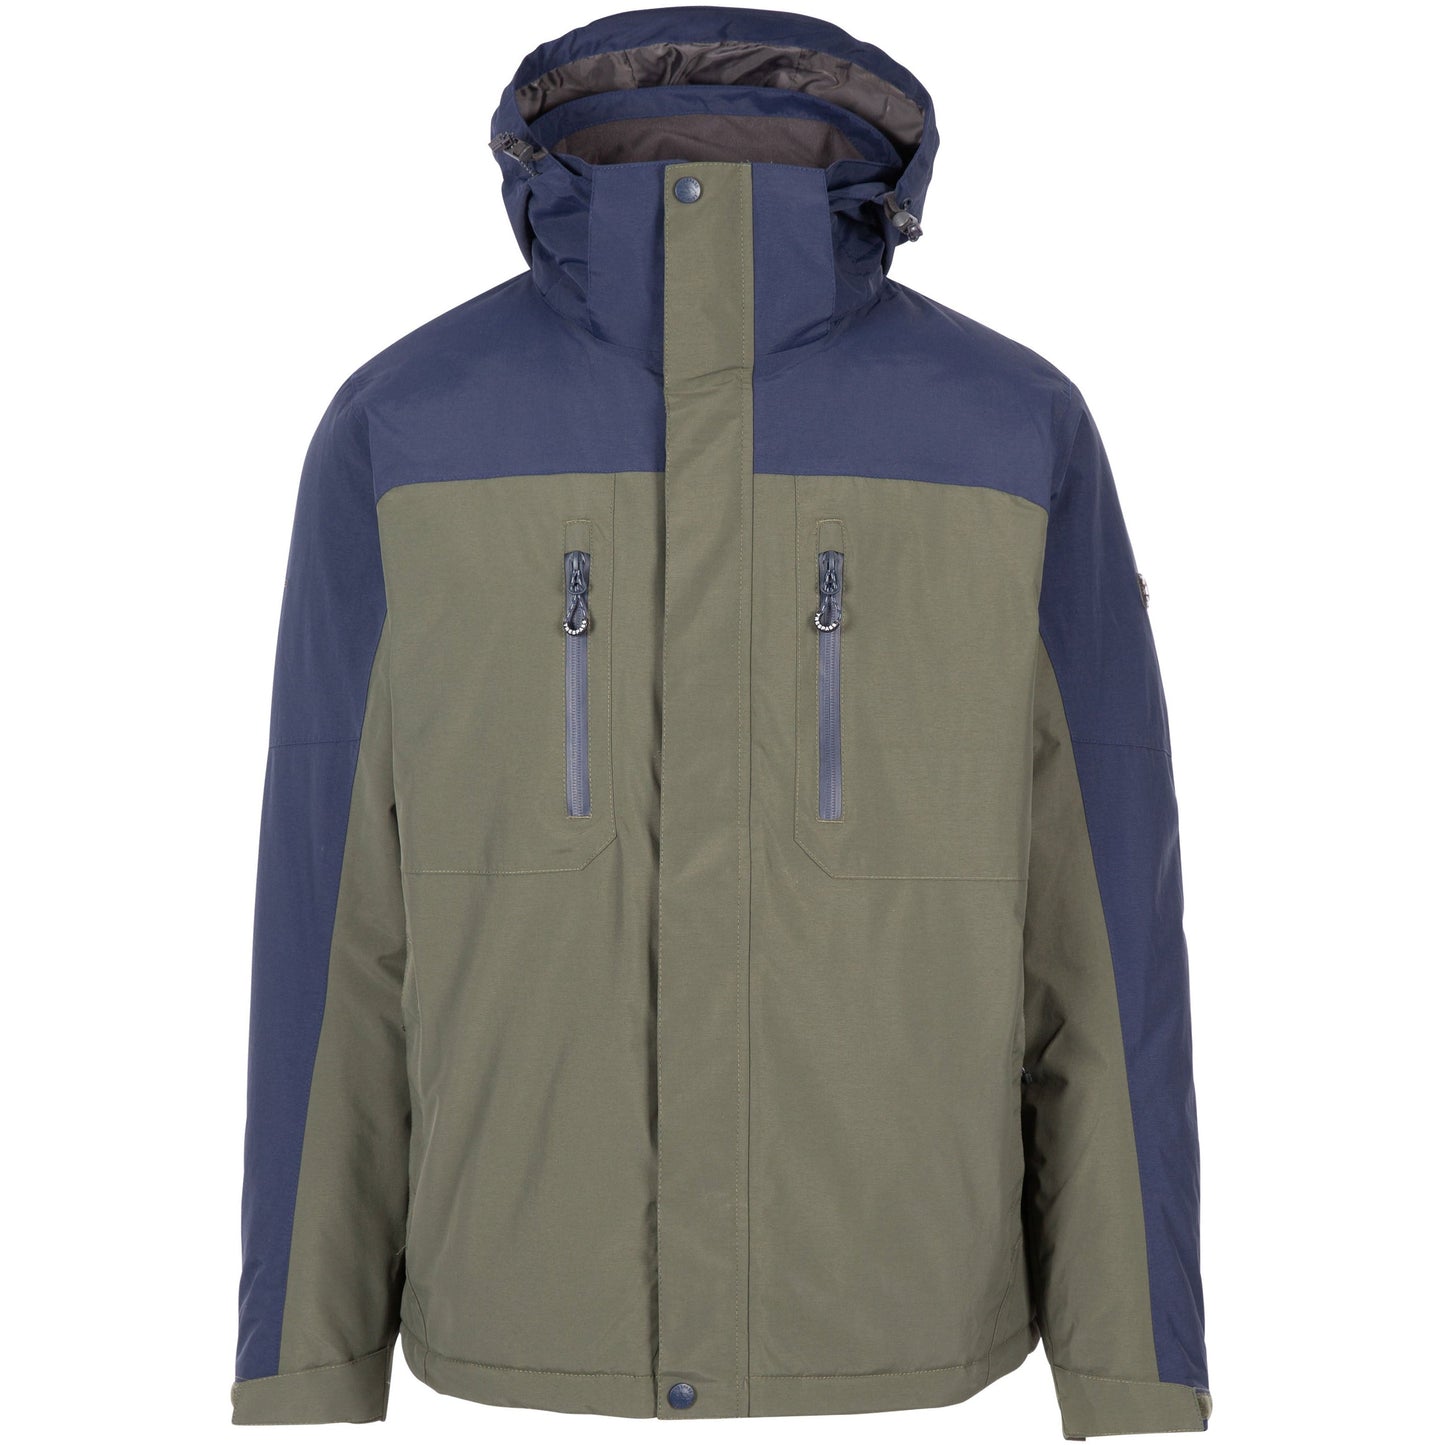 Murchan Men's Padded Waterproof Rain Jacket with Recycled Fabric in Navy